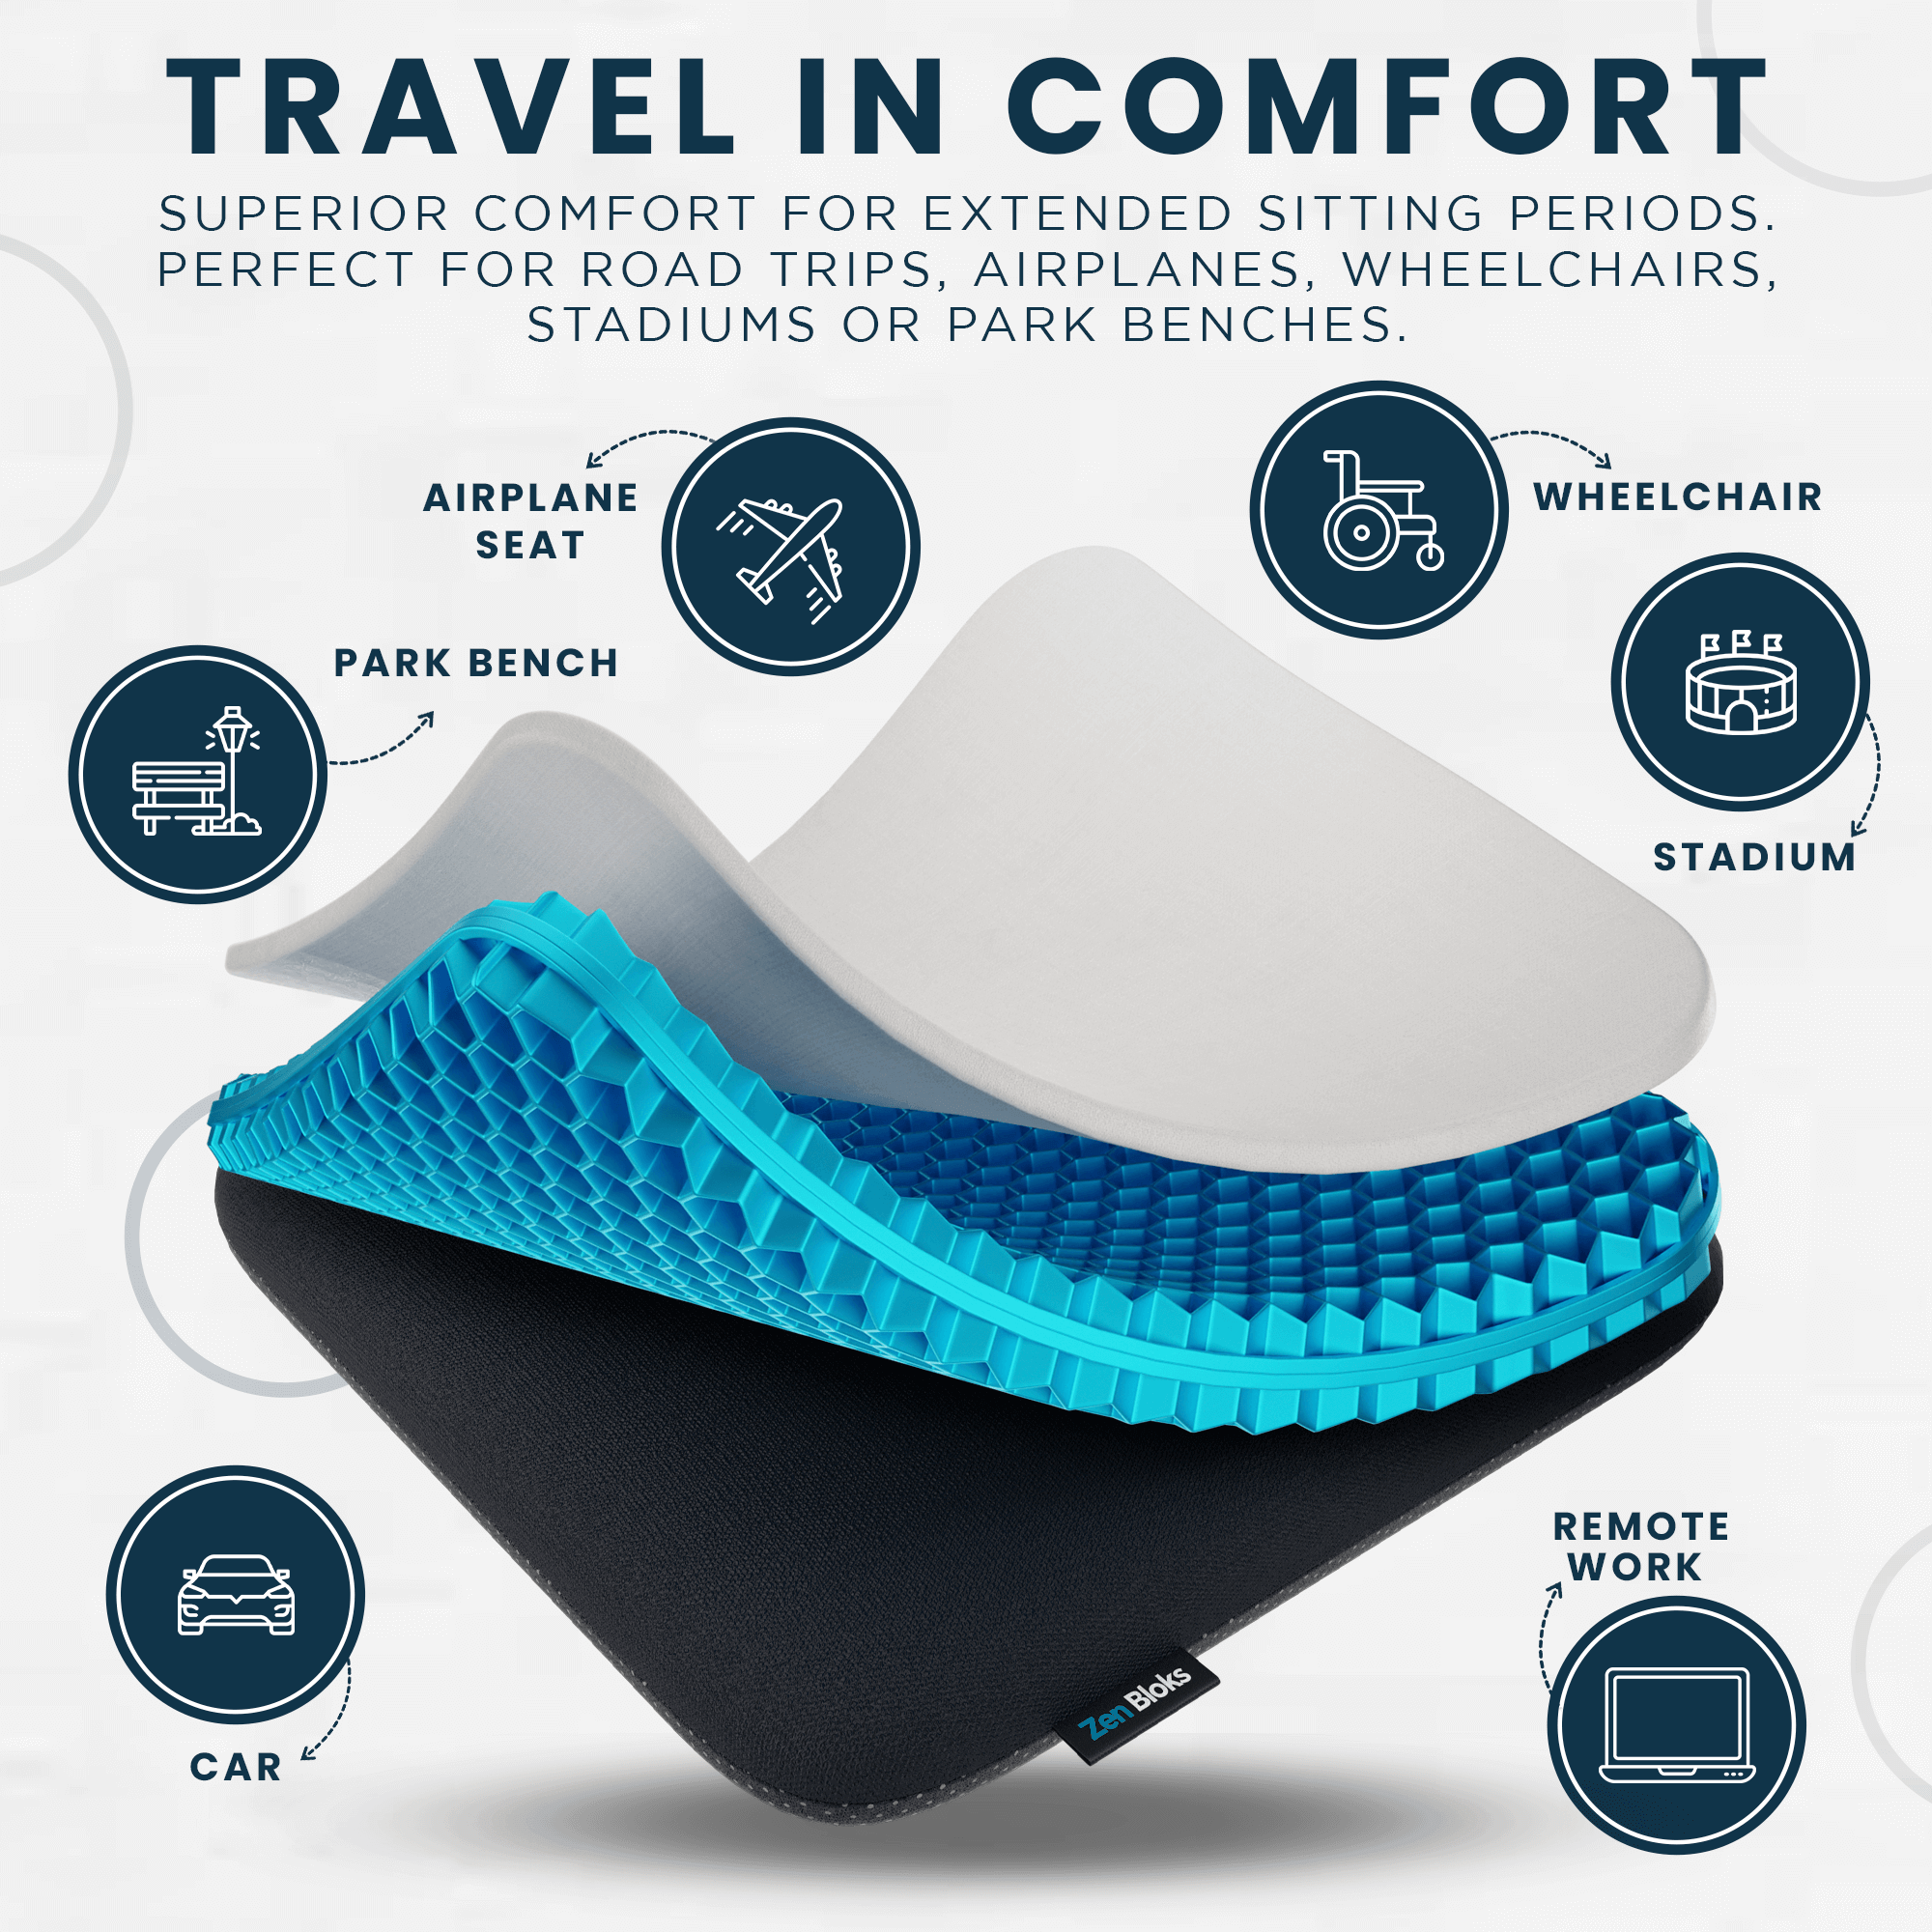 Zen Bloks XL Extra Thick Gel Seat Cushion for Extended Sitting, Office, Back, Tailbone, Sciatica, Coccyx, and Hip Pain Relief - Non-Slip for Wheelchairs, Car Seat for Driving (20"x20"x2")